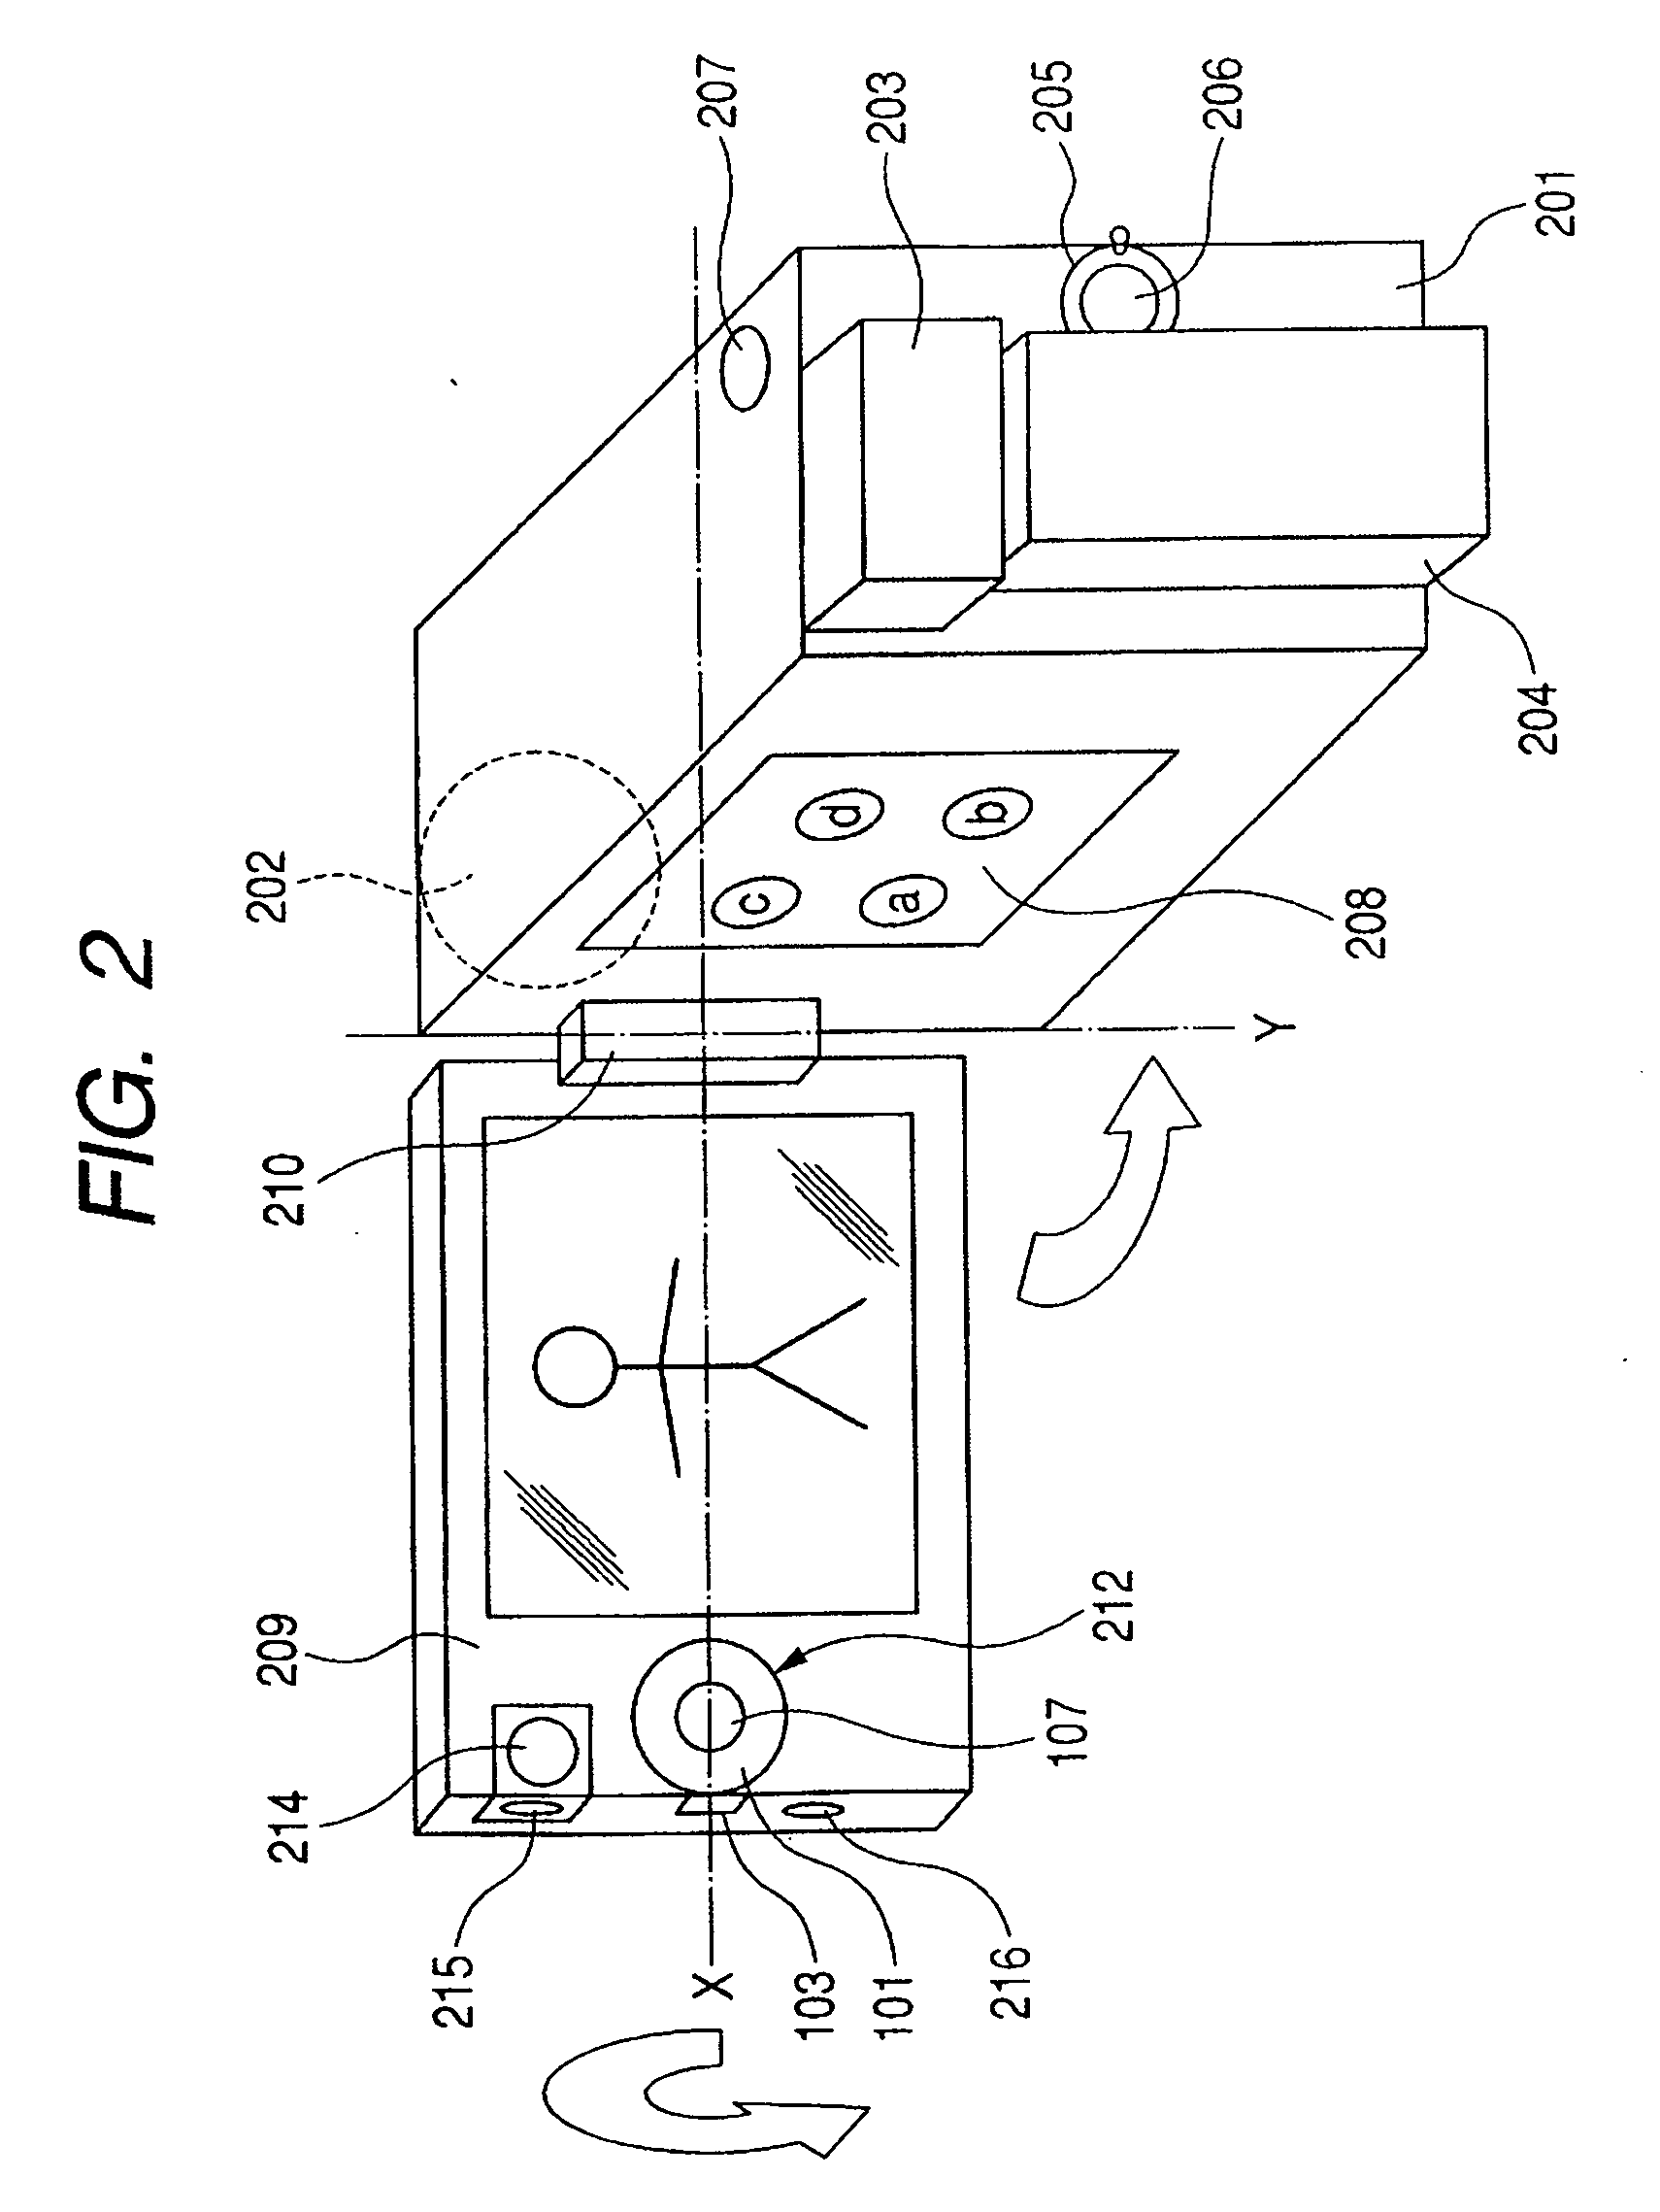 Multi-function input switch and photographing apparatus therewith